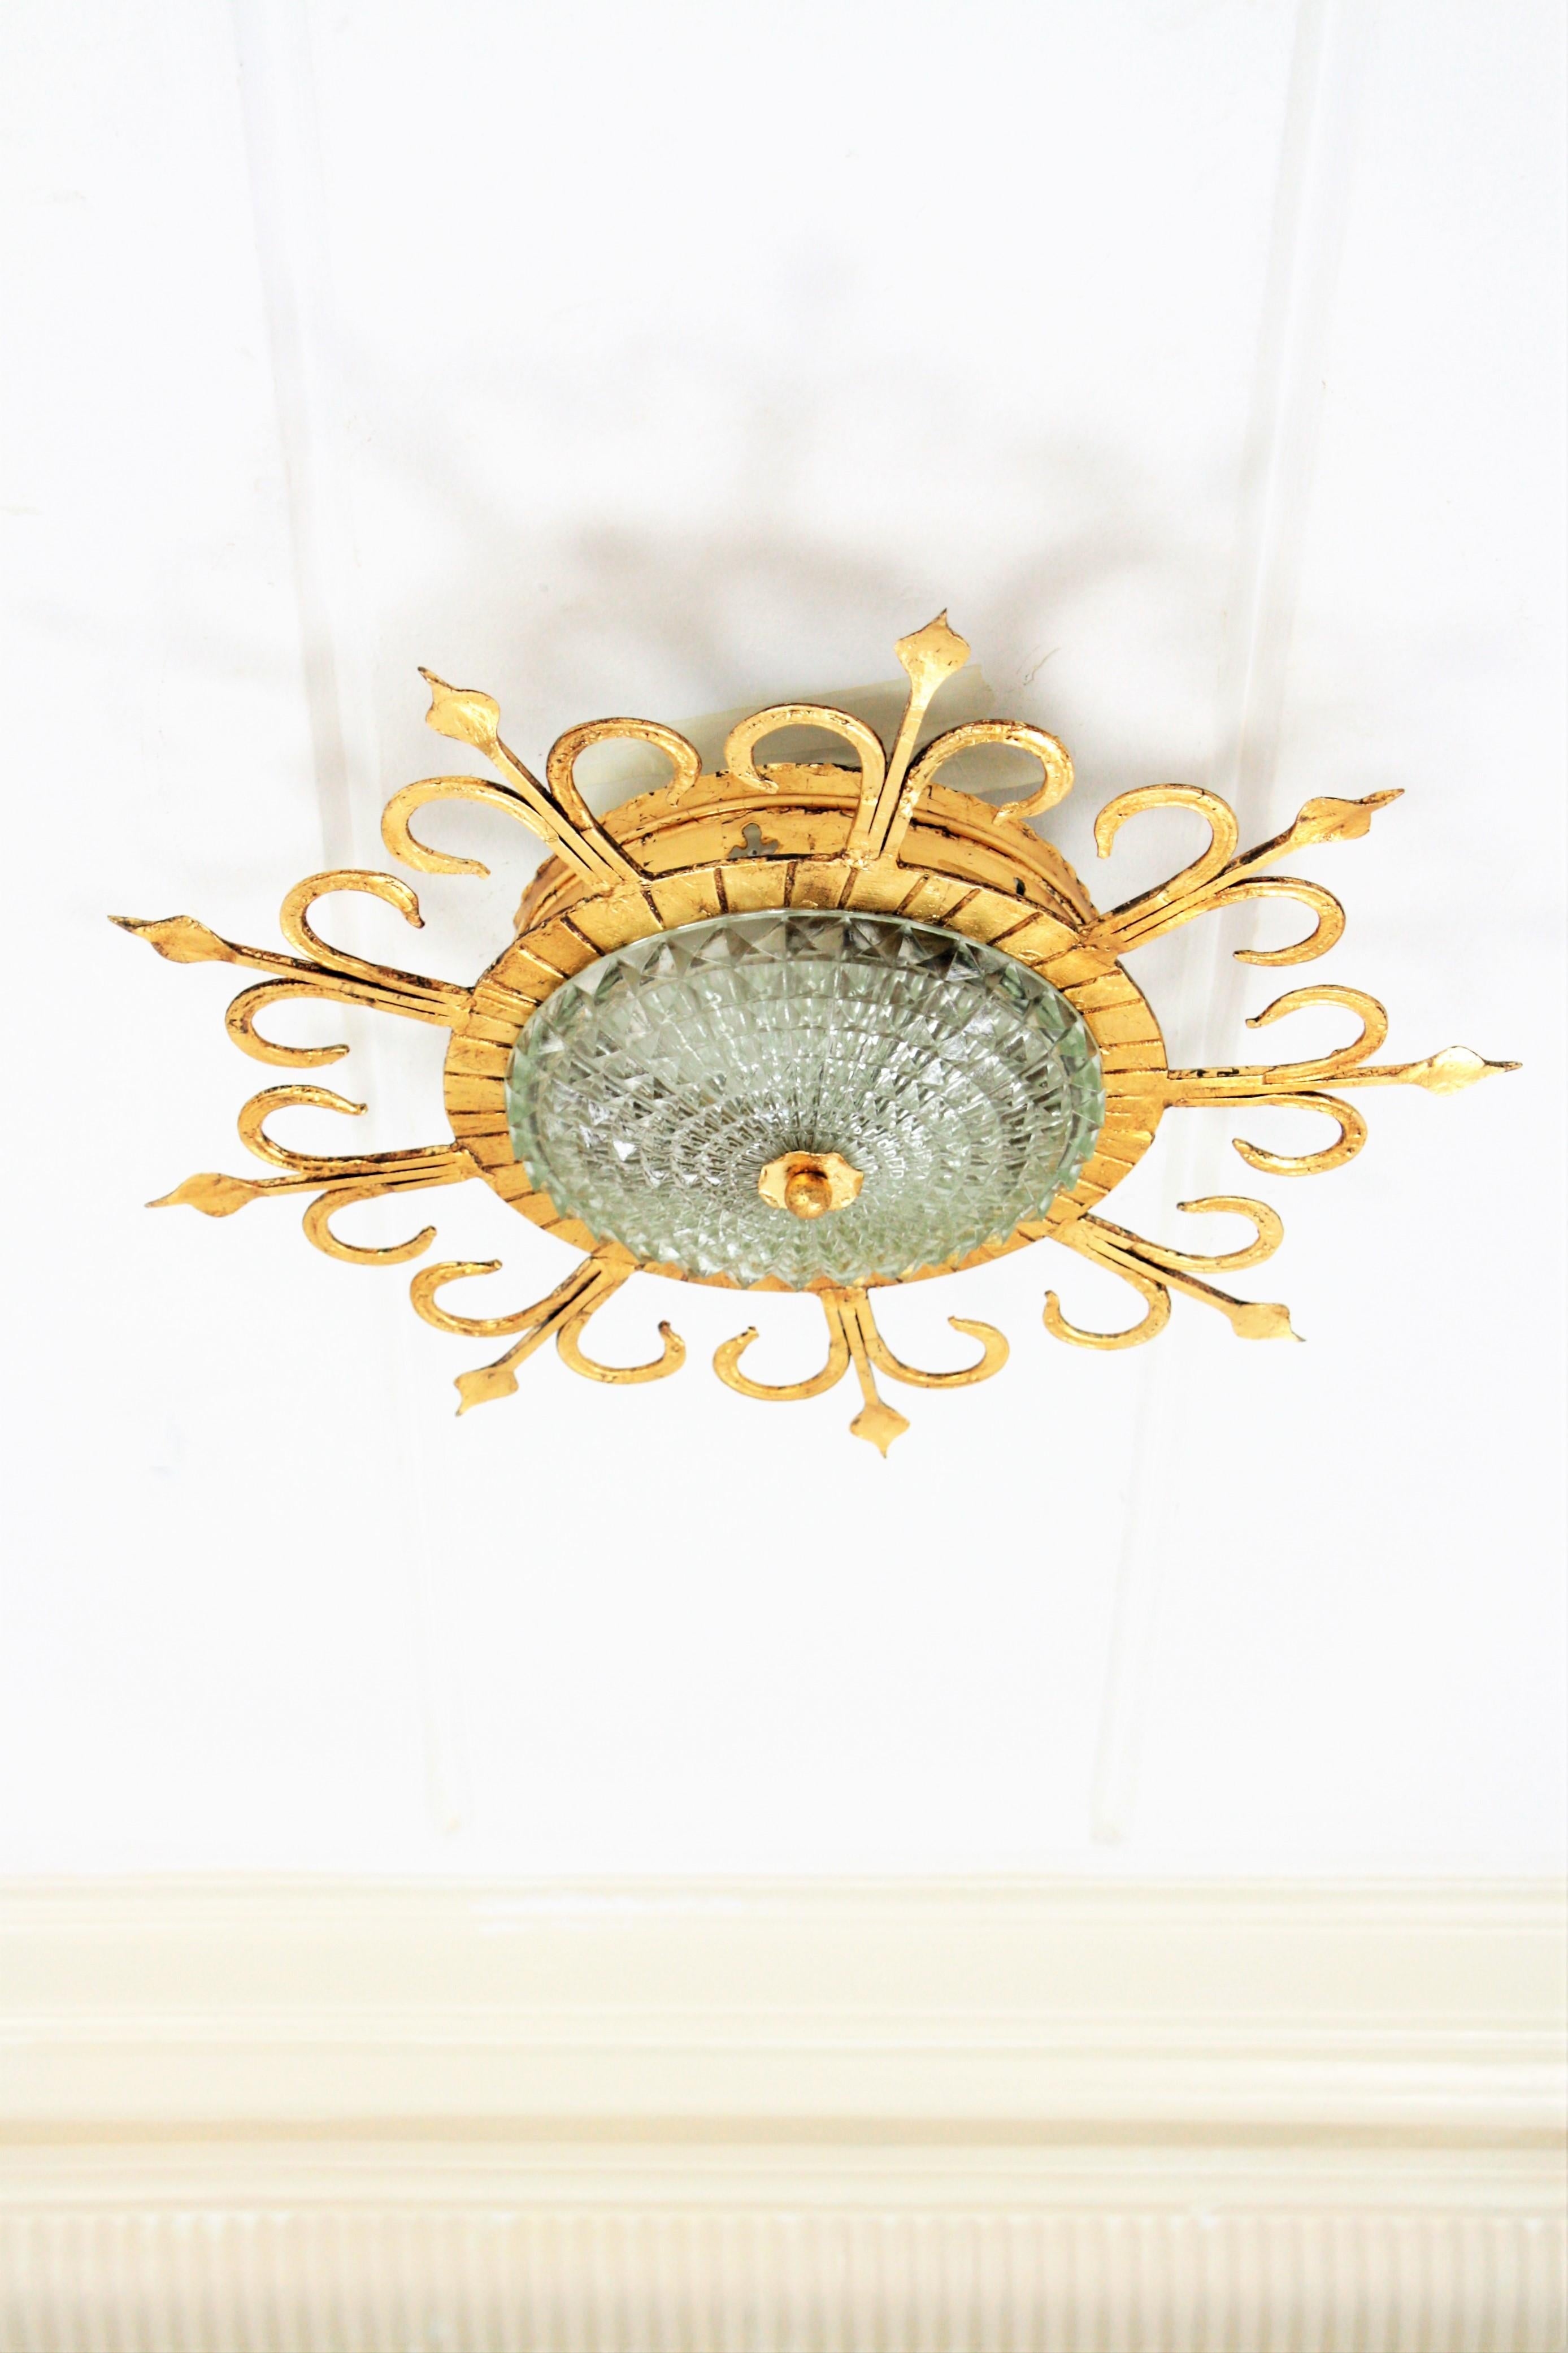 Beautiful hand-hammered iron and glass ceiling light fixture with neoclassical and Gothic Revival accents. A forged iron with gold leaf finish fixture, a pressed frosted glass shade with a gilt iron ball finial. This lamp has an highly decorative